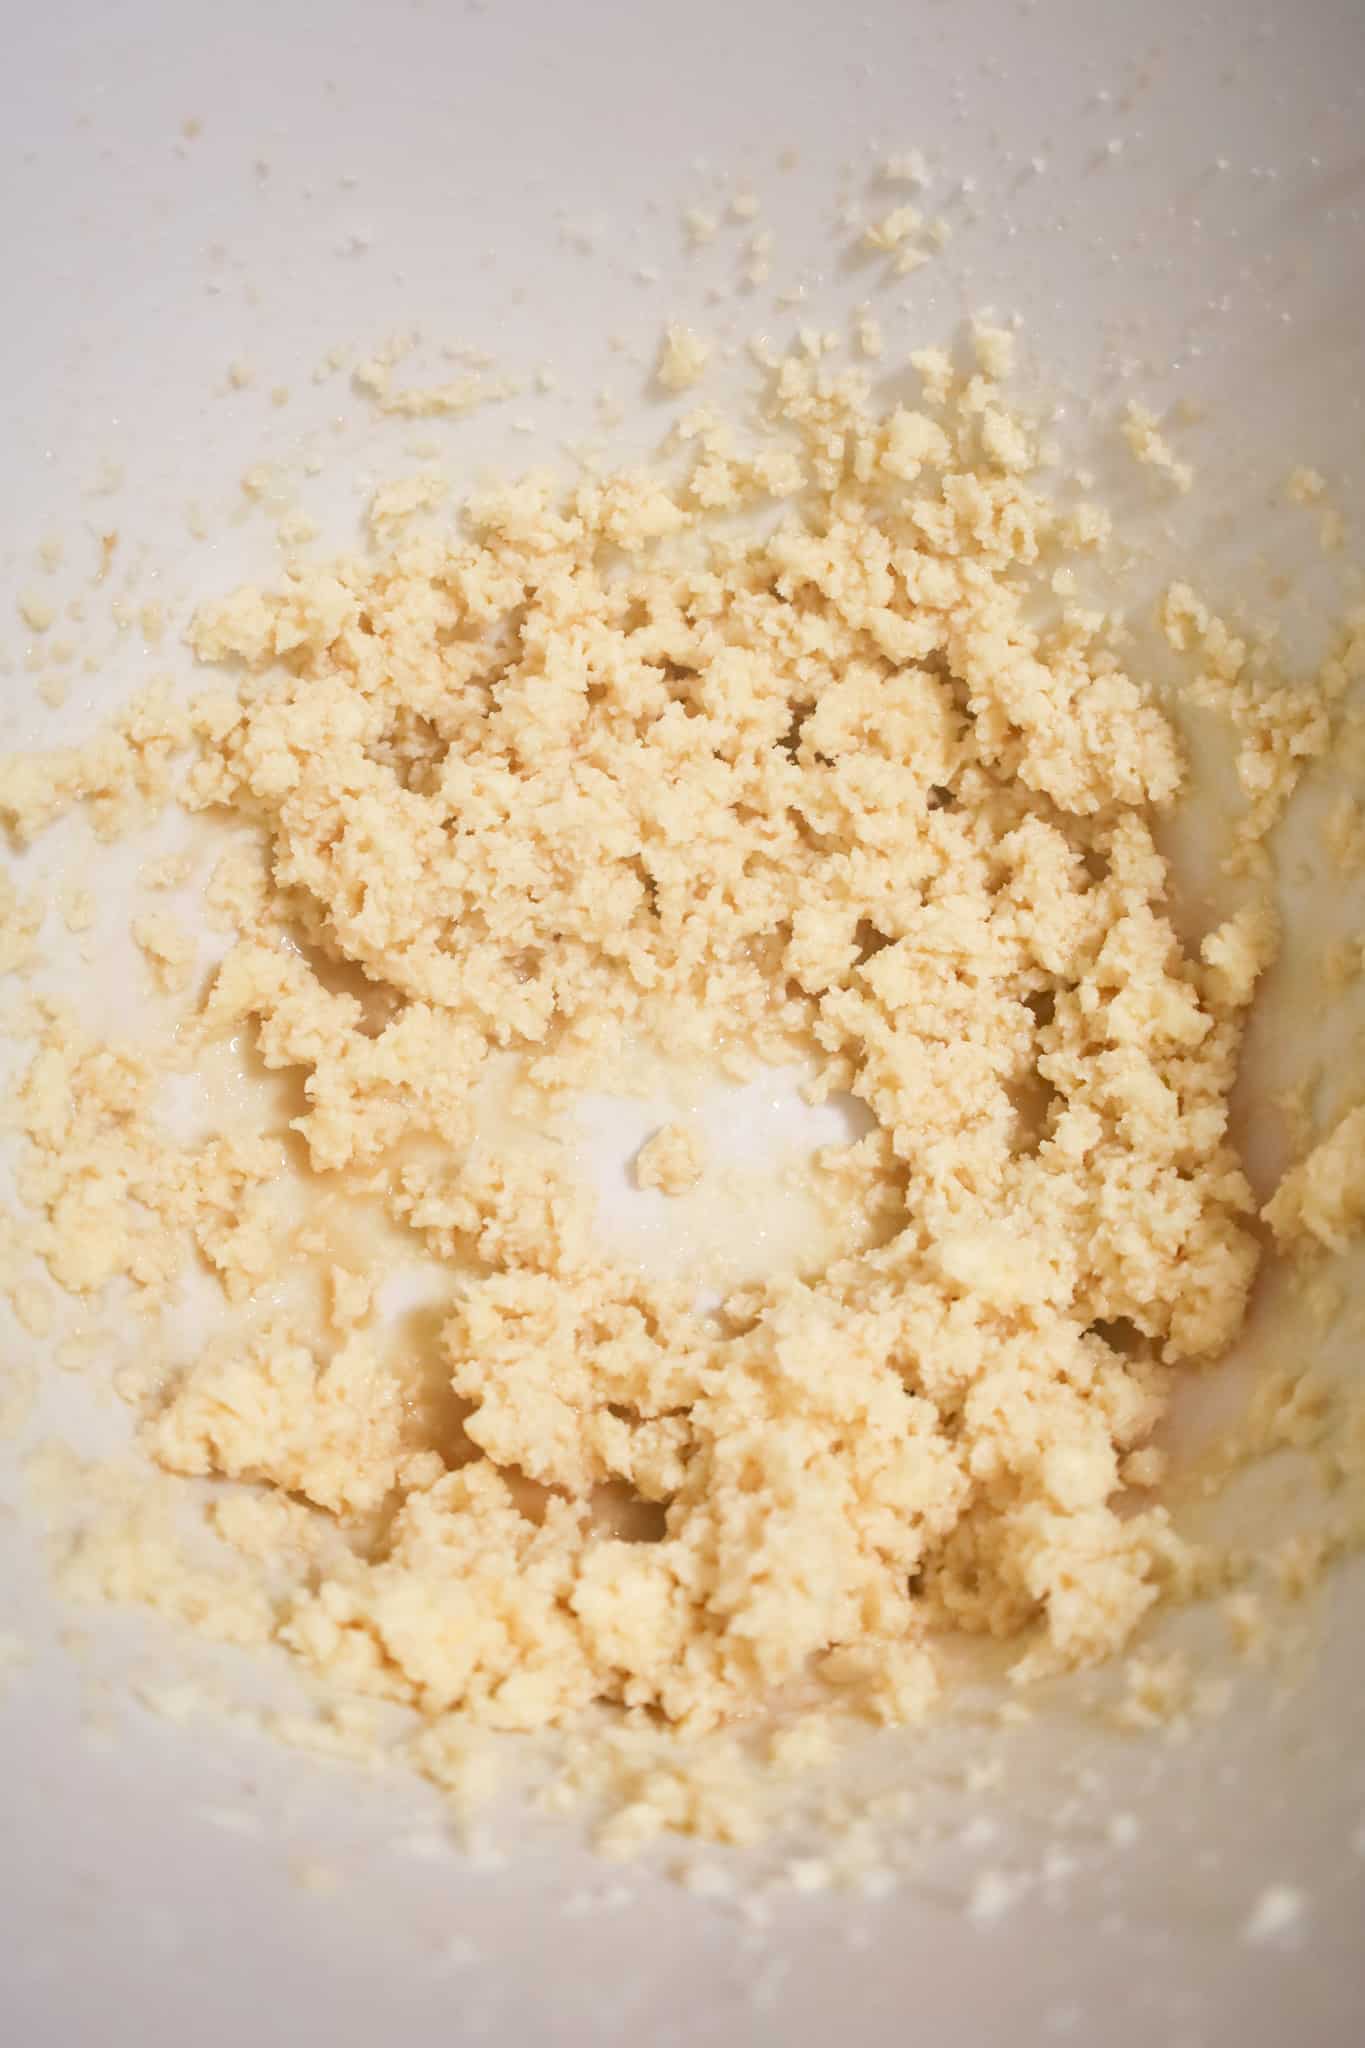 butter, sugar, vanilla and milk mixture in a mixing bowl